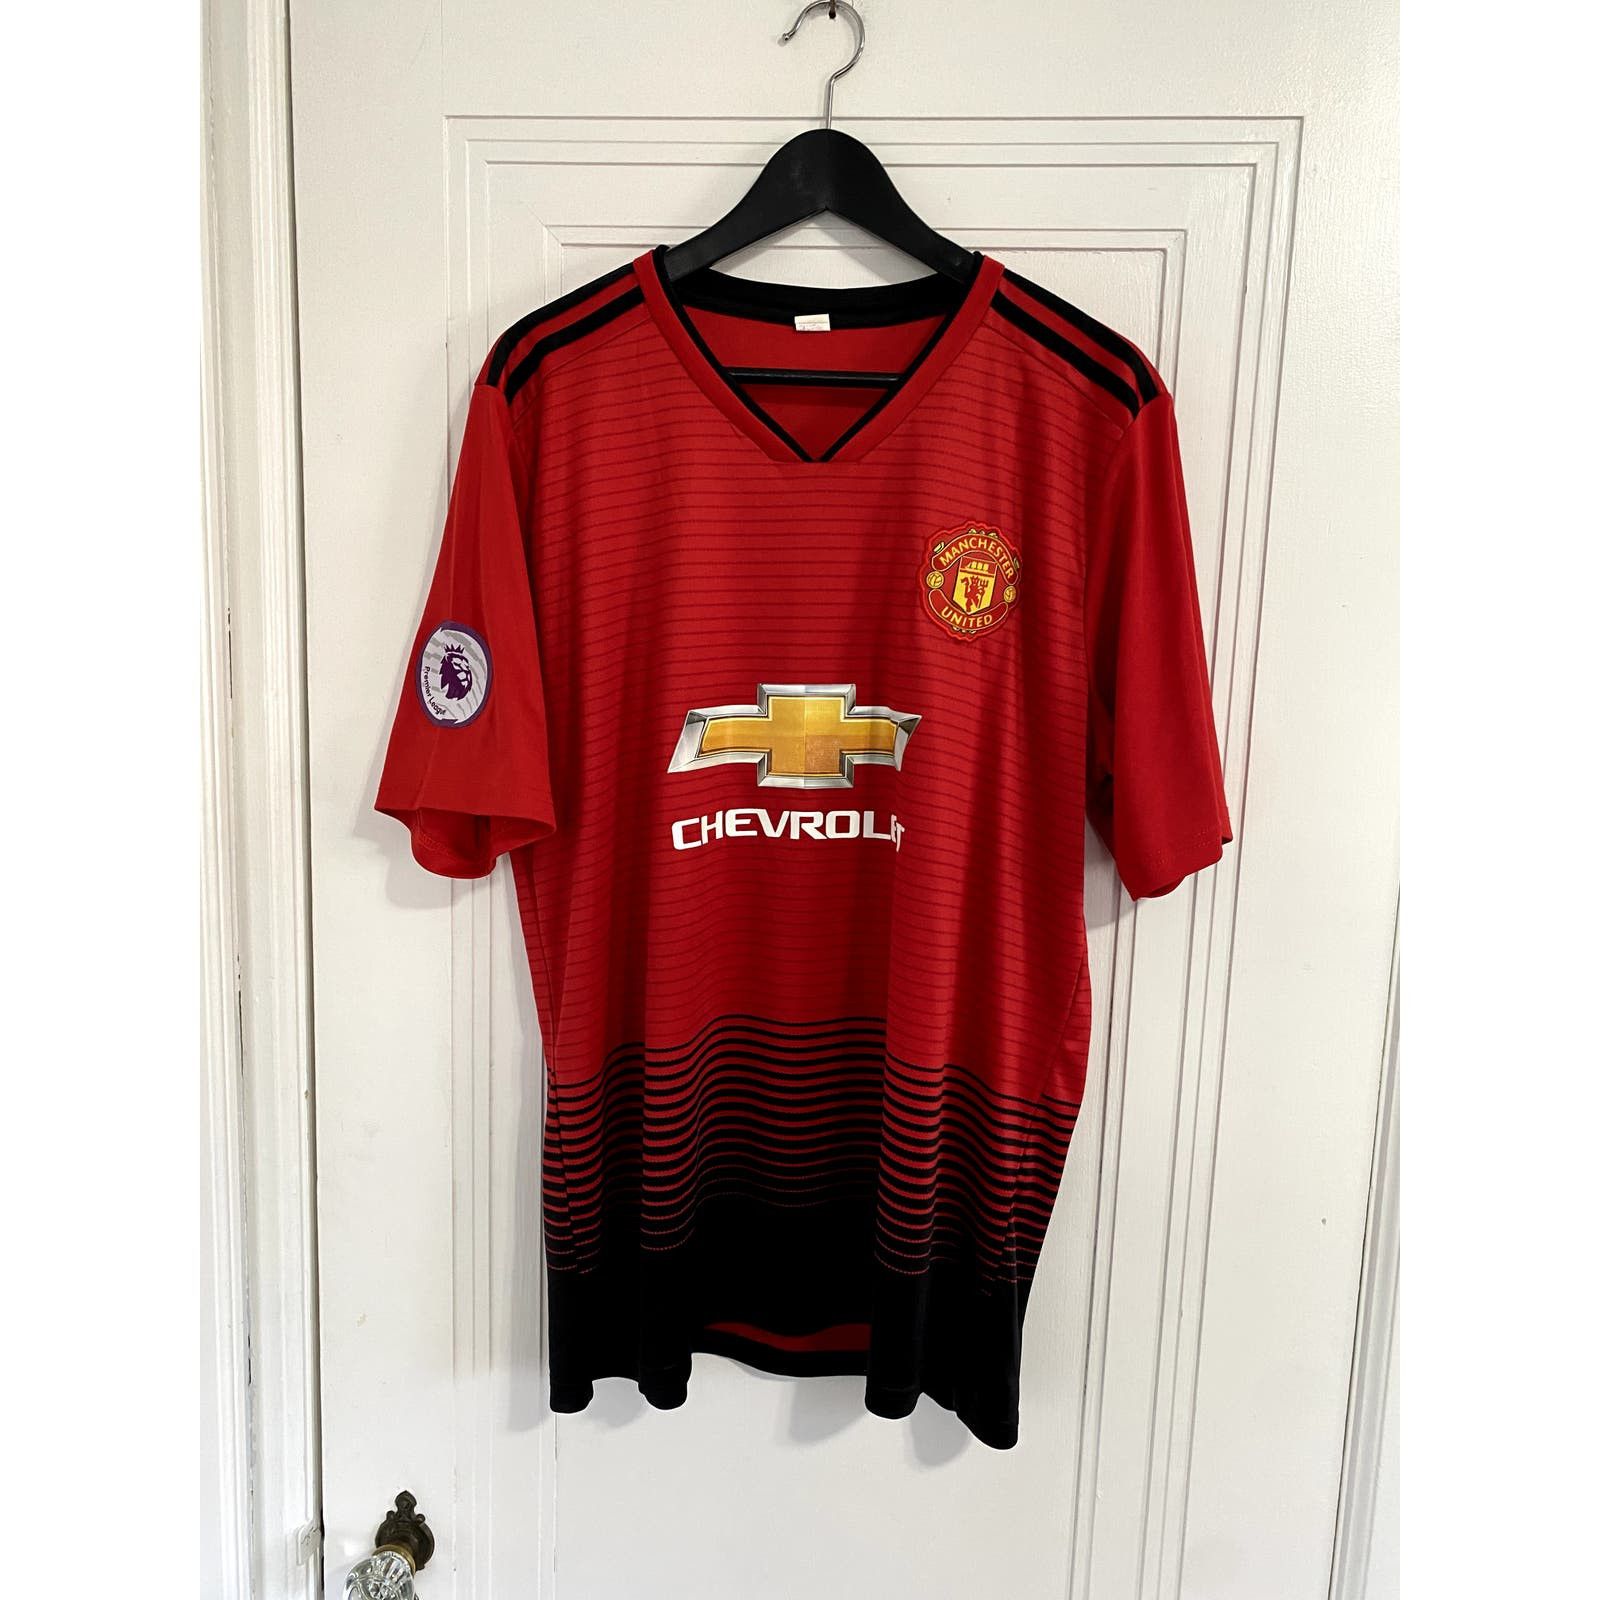 Manchester United Manchester United FC Soccer Jersey Size XL Size US XL / EU 56 / 4 - 1 Preview